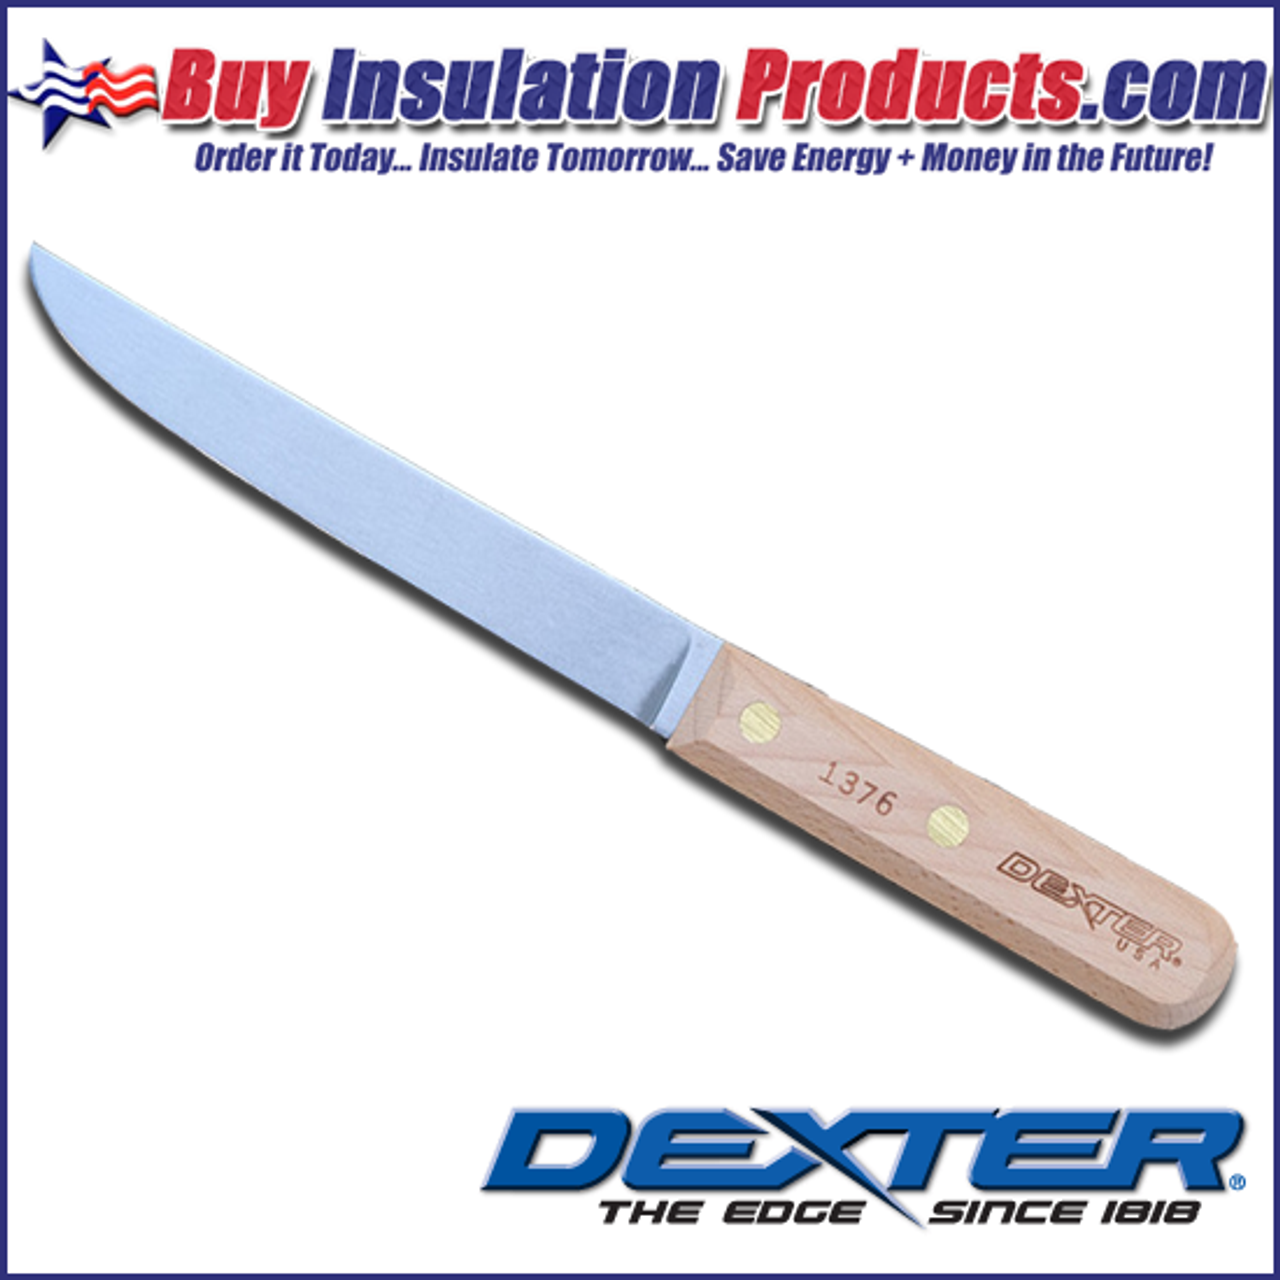 https://cdn11.bigcommerce.com/s-sjt5ll3s/images/stencil/1280x1280/products/235/3090/Dexter_Russell_1376_Rigid_Insulation_Knife__72095.1687295659.png?c=2